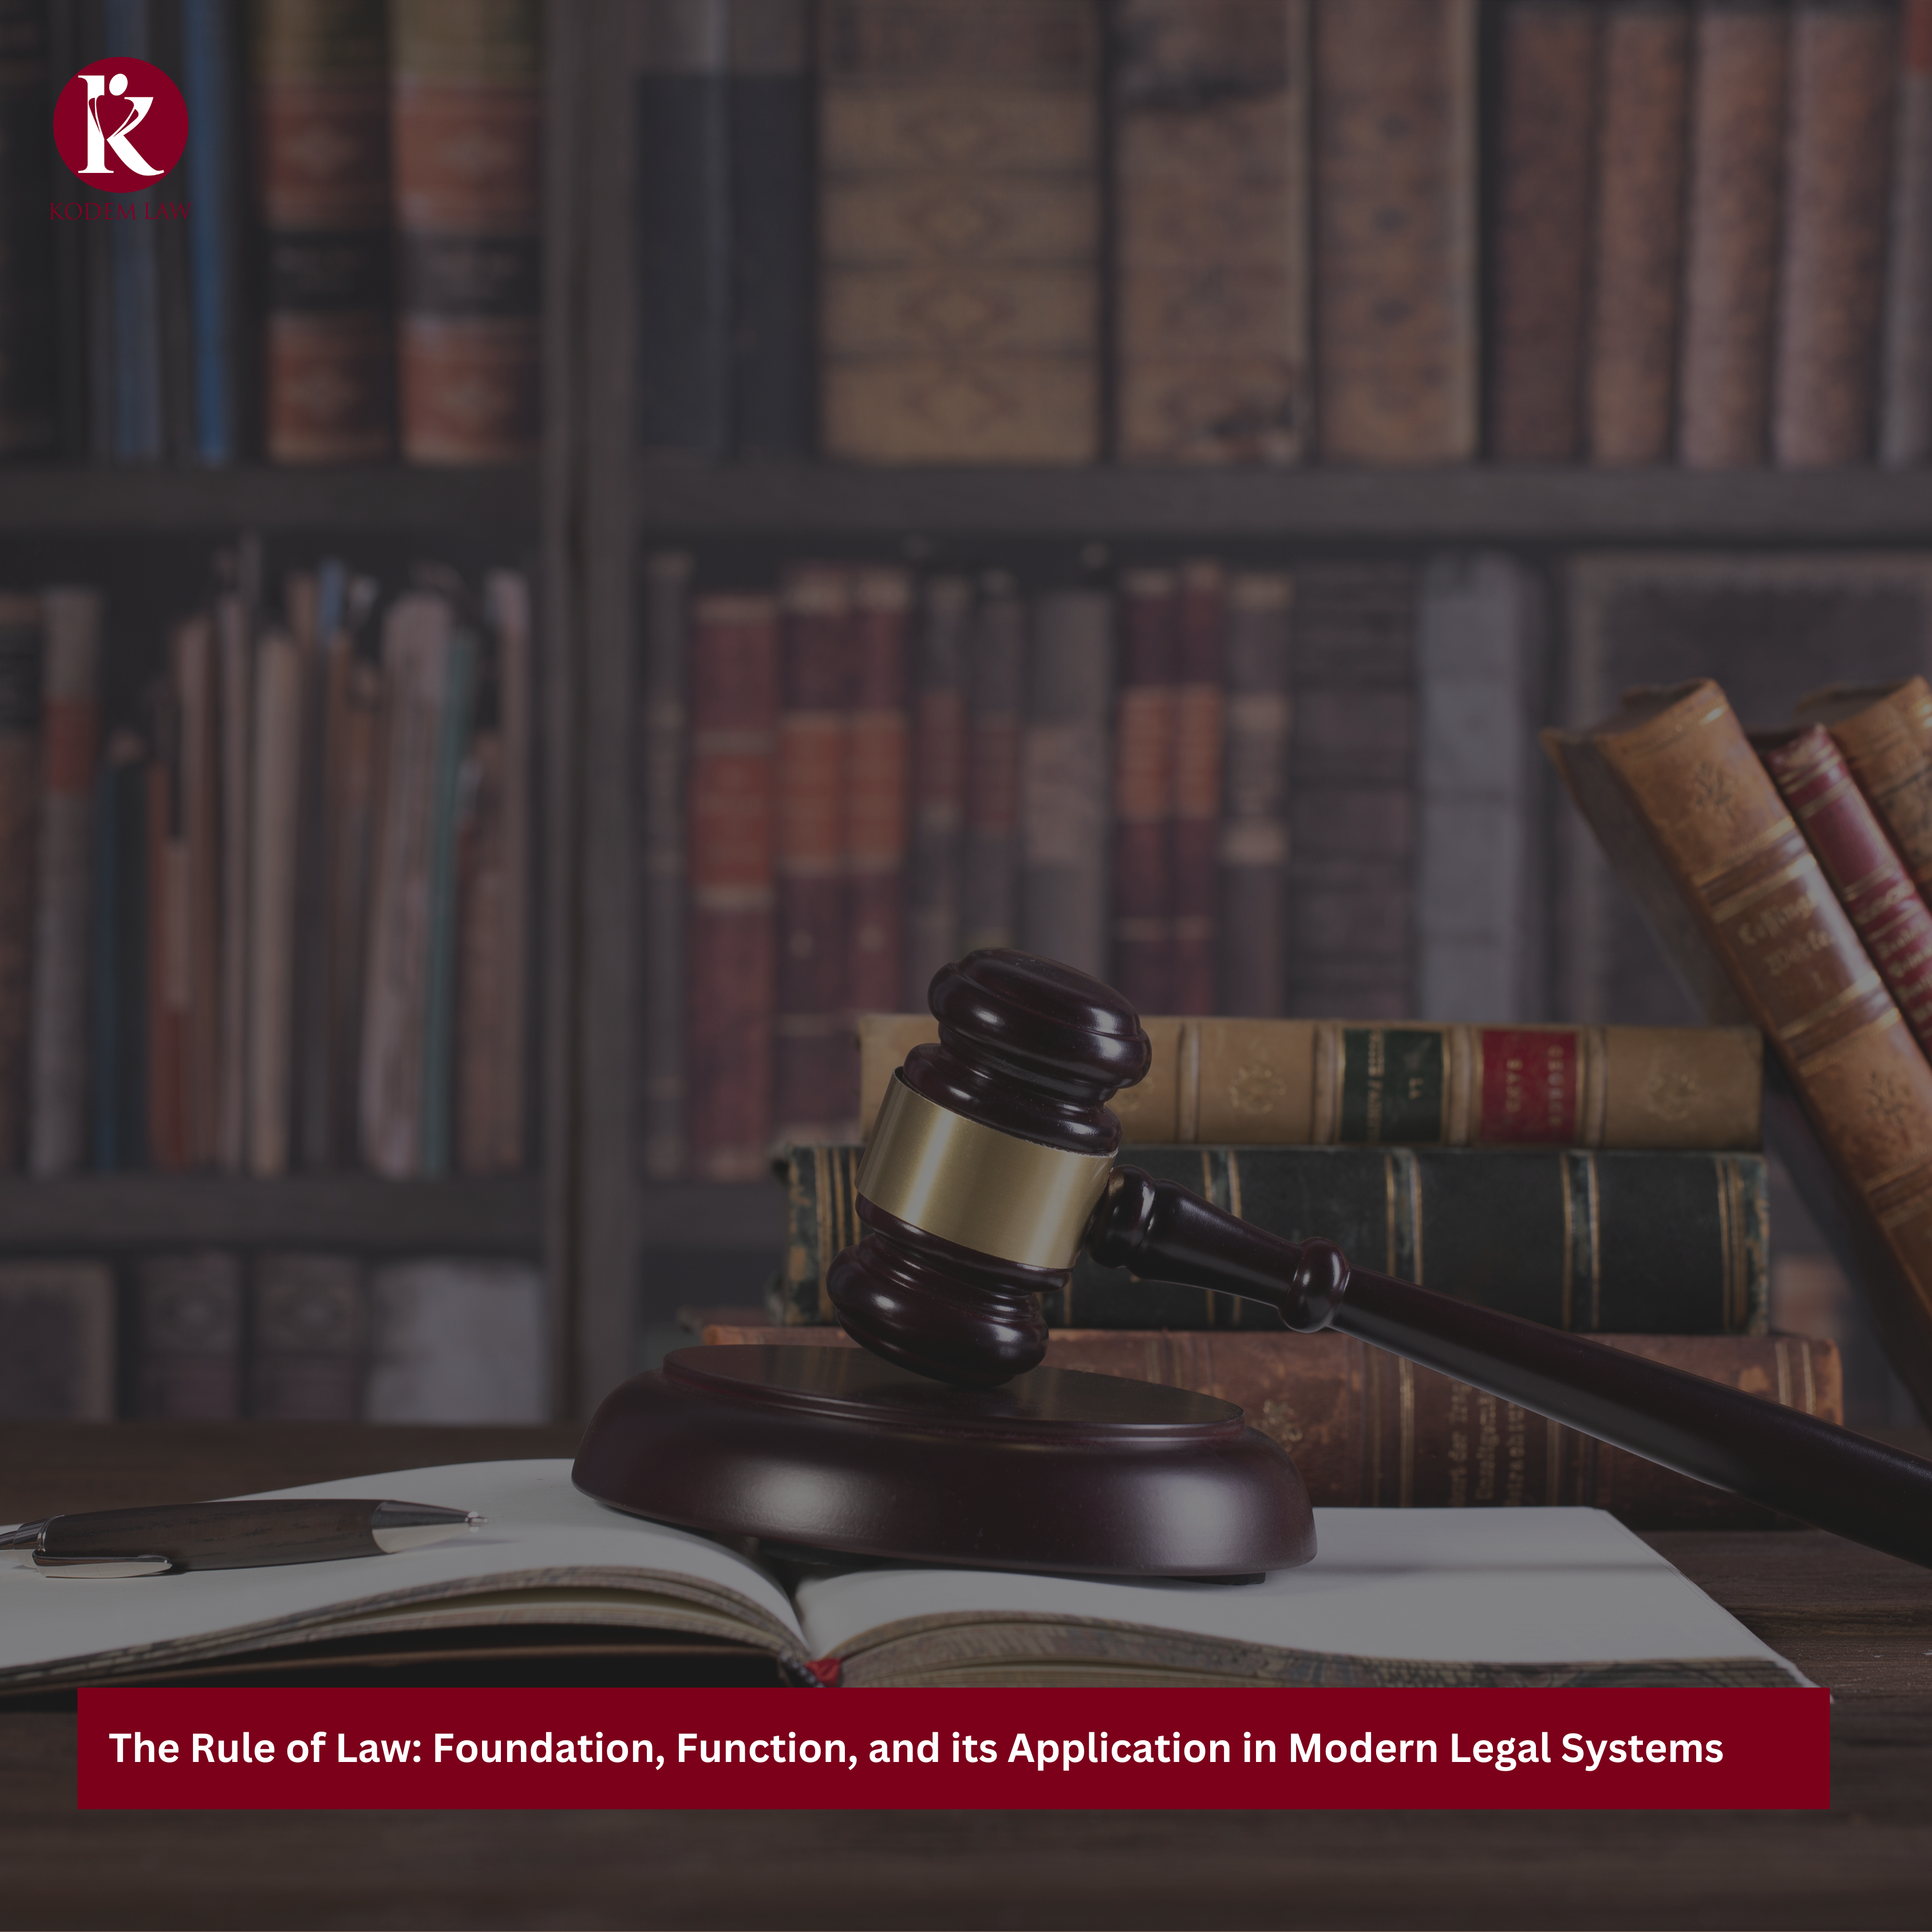 The Rule of Law: Foundation, Function, and its Application in Modern Legal Systems